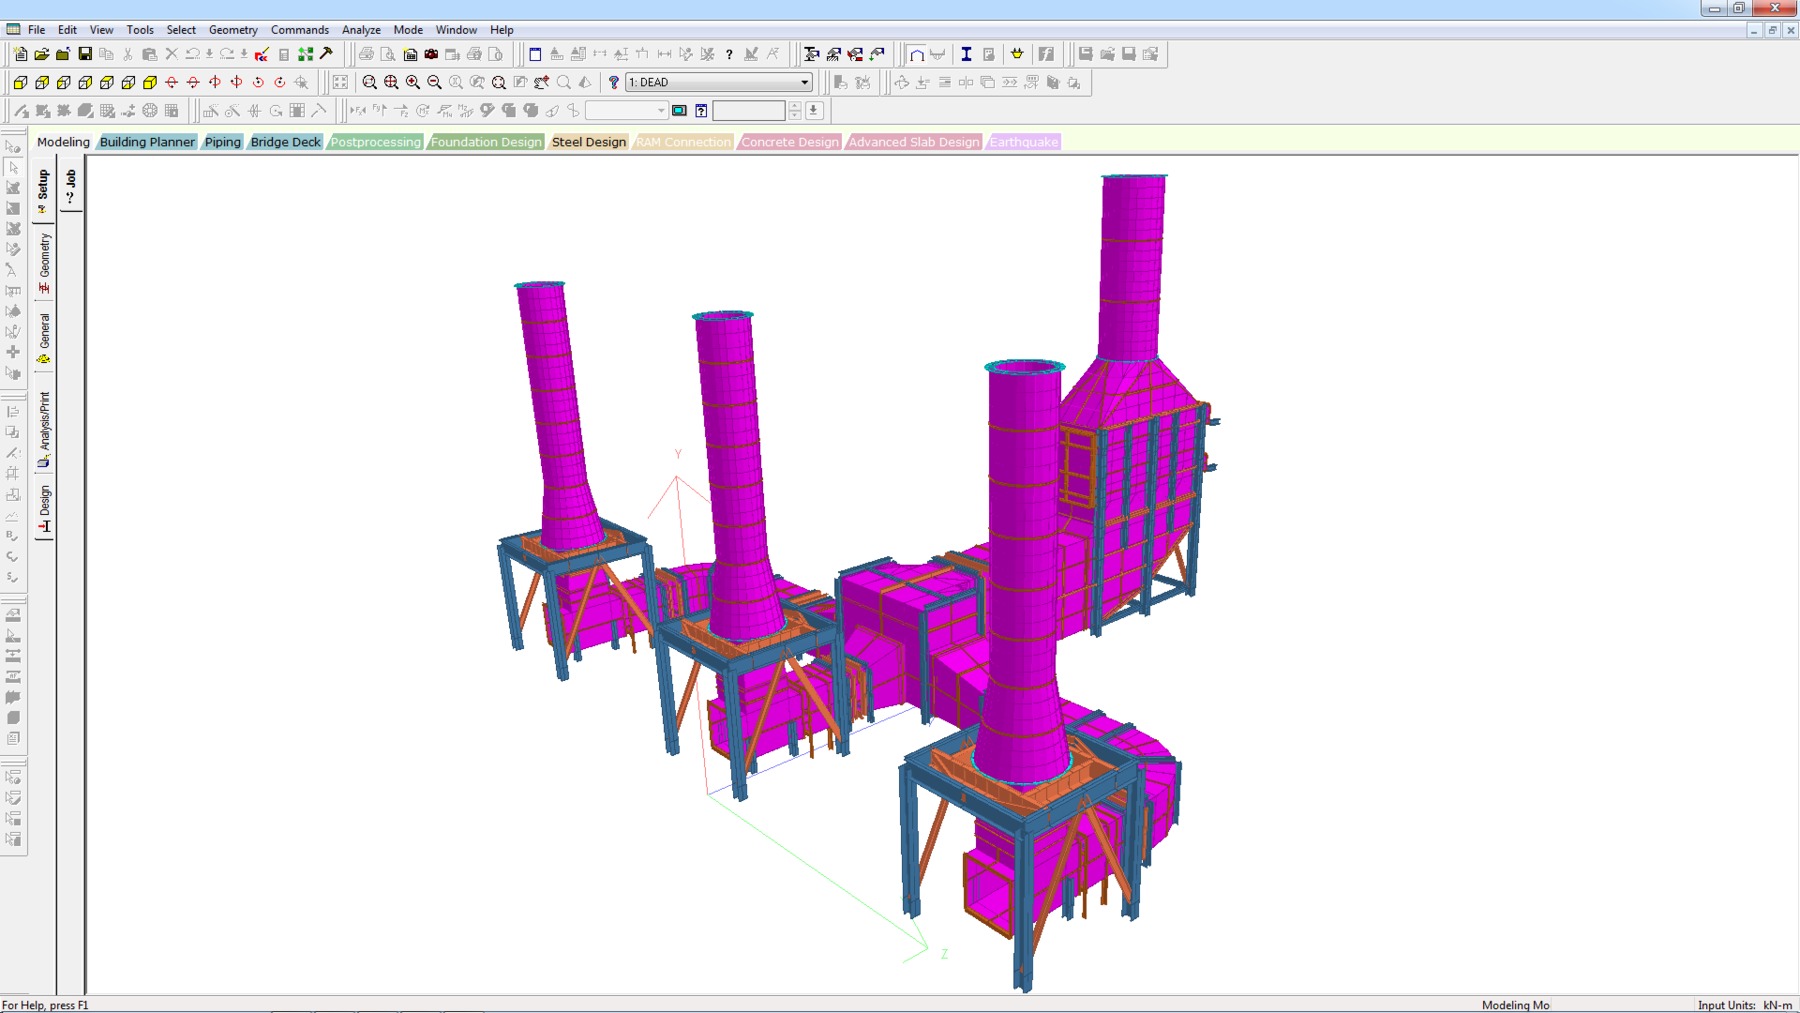 Design and analyze structural models